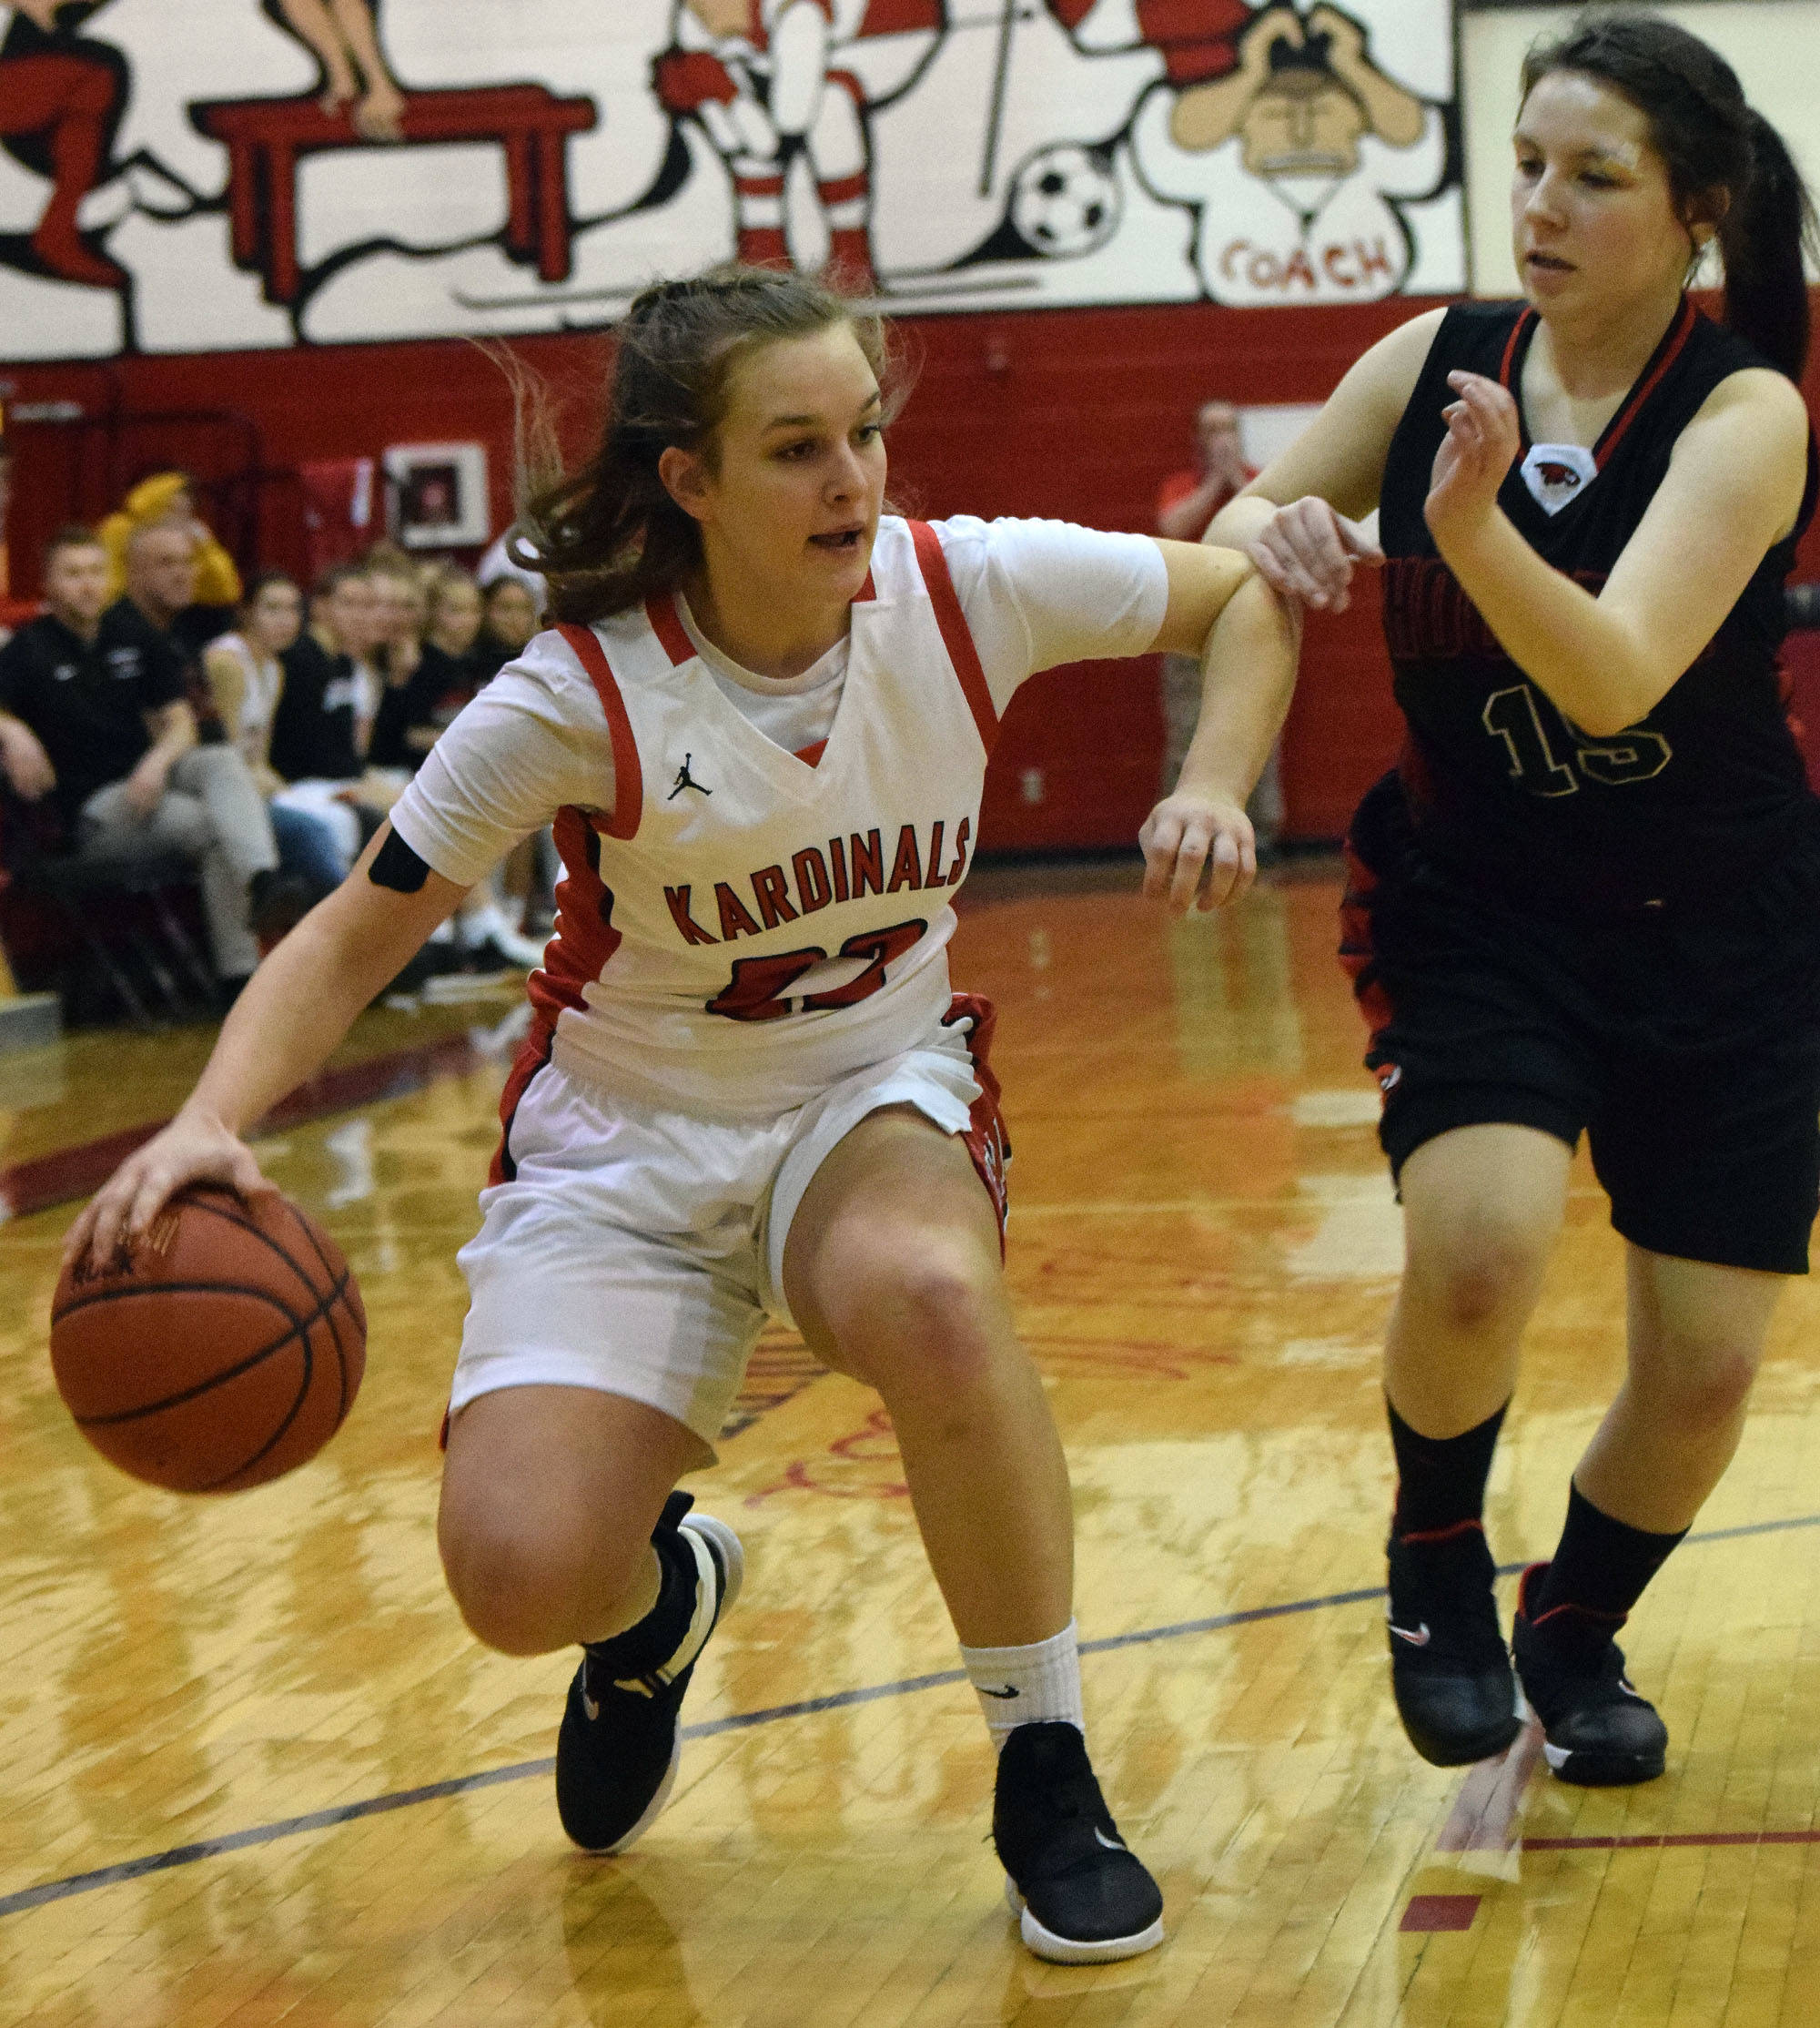 Kenai’s Jaiden Streiff looks for space against Houston’s Icis Garcia Saturday afternoon at Kenai Central High School. (Photo by Joey Klecka/Peninsula Clarion)